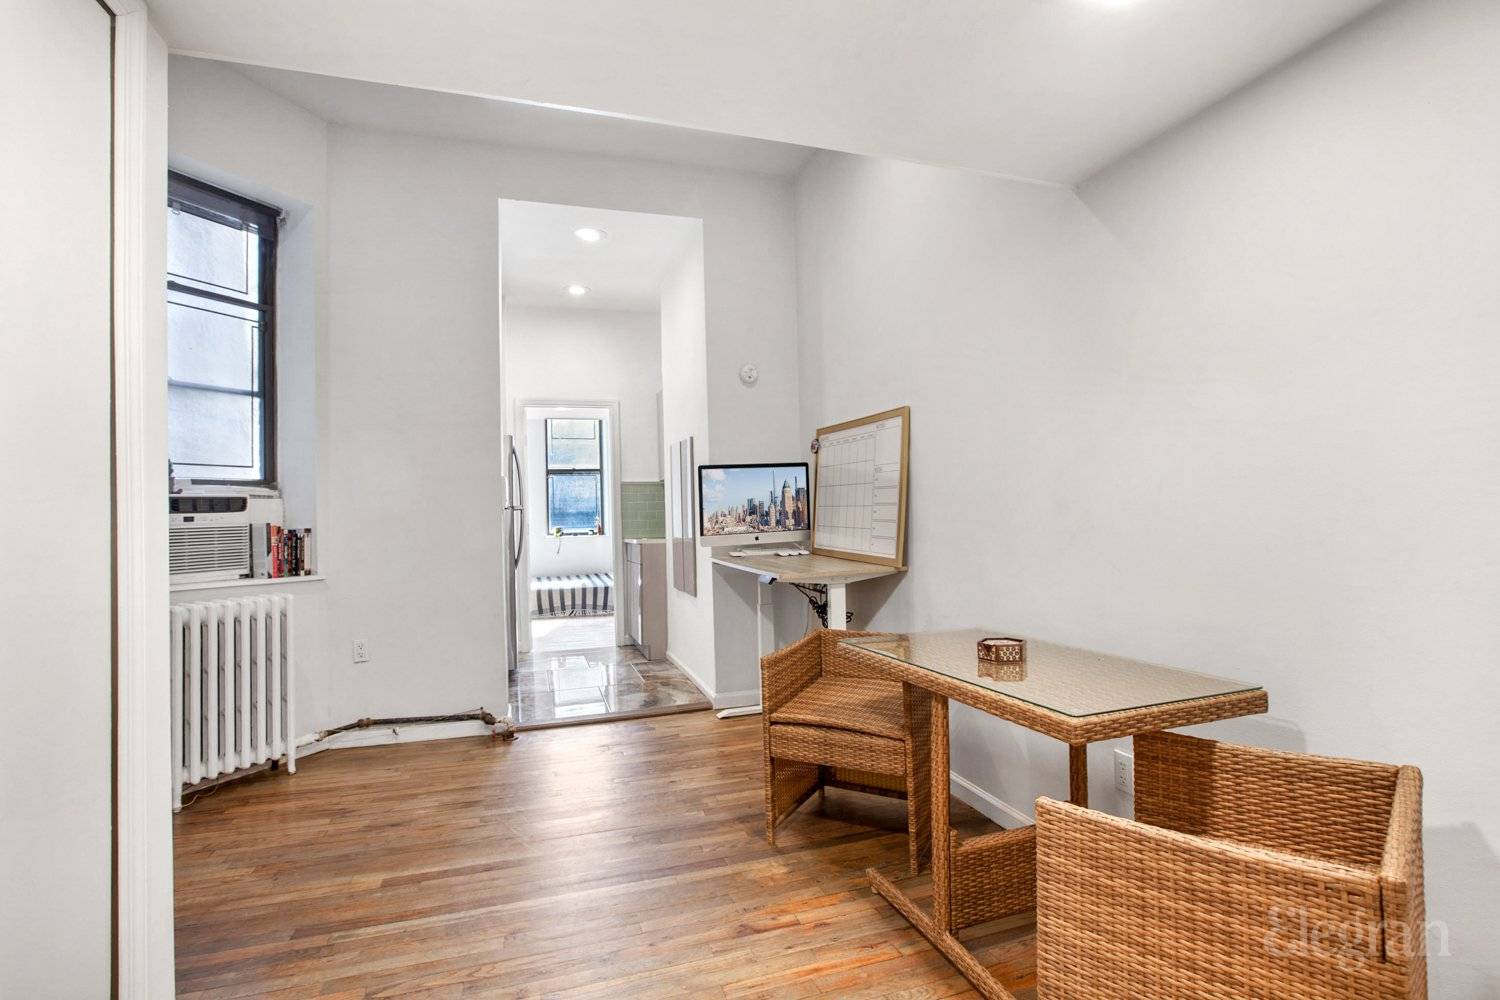 Located on a beautiful, quiet, and tree lined block right in the heart of Chelsea, this is an amazing opportunity to own a true 1 bedroom in one of the ...